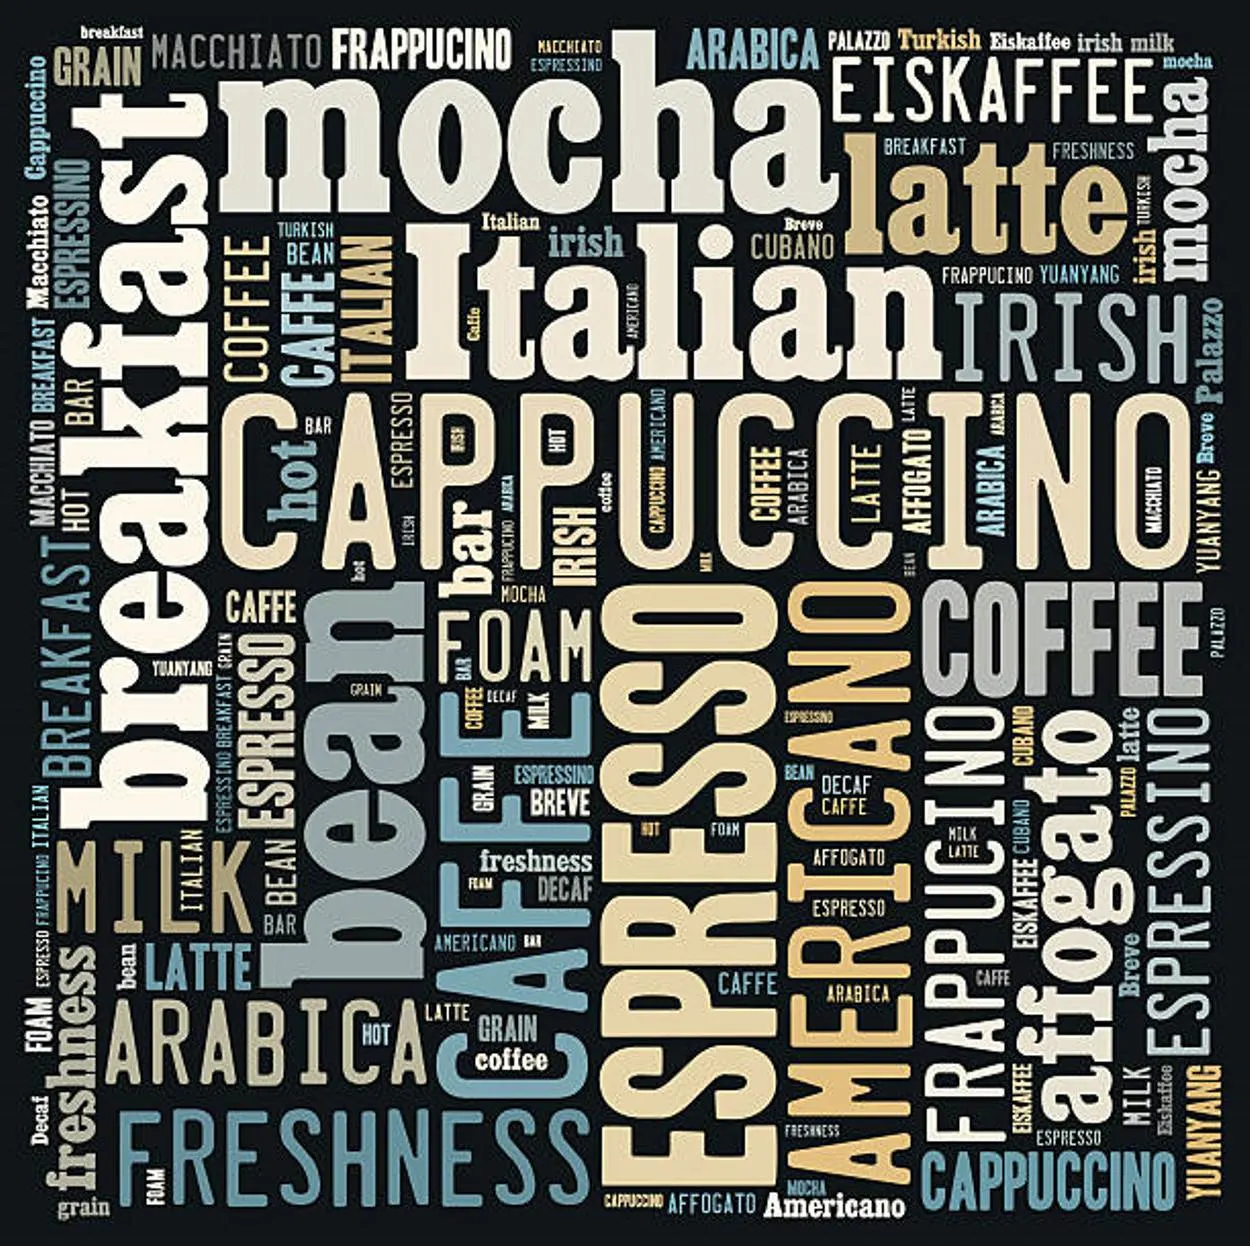 The whole coffee world